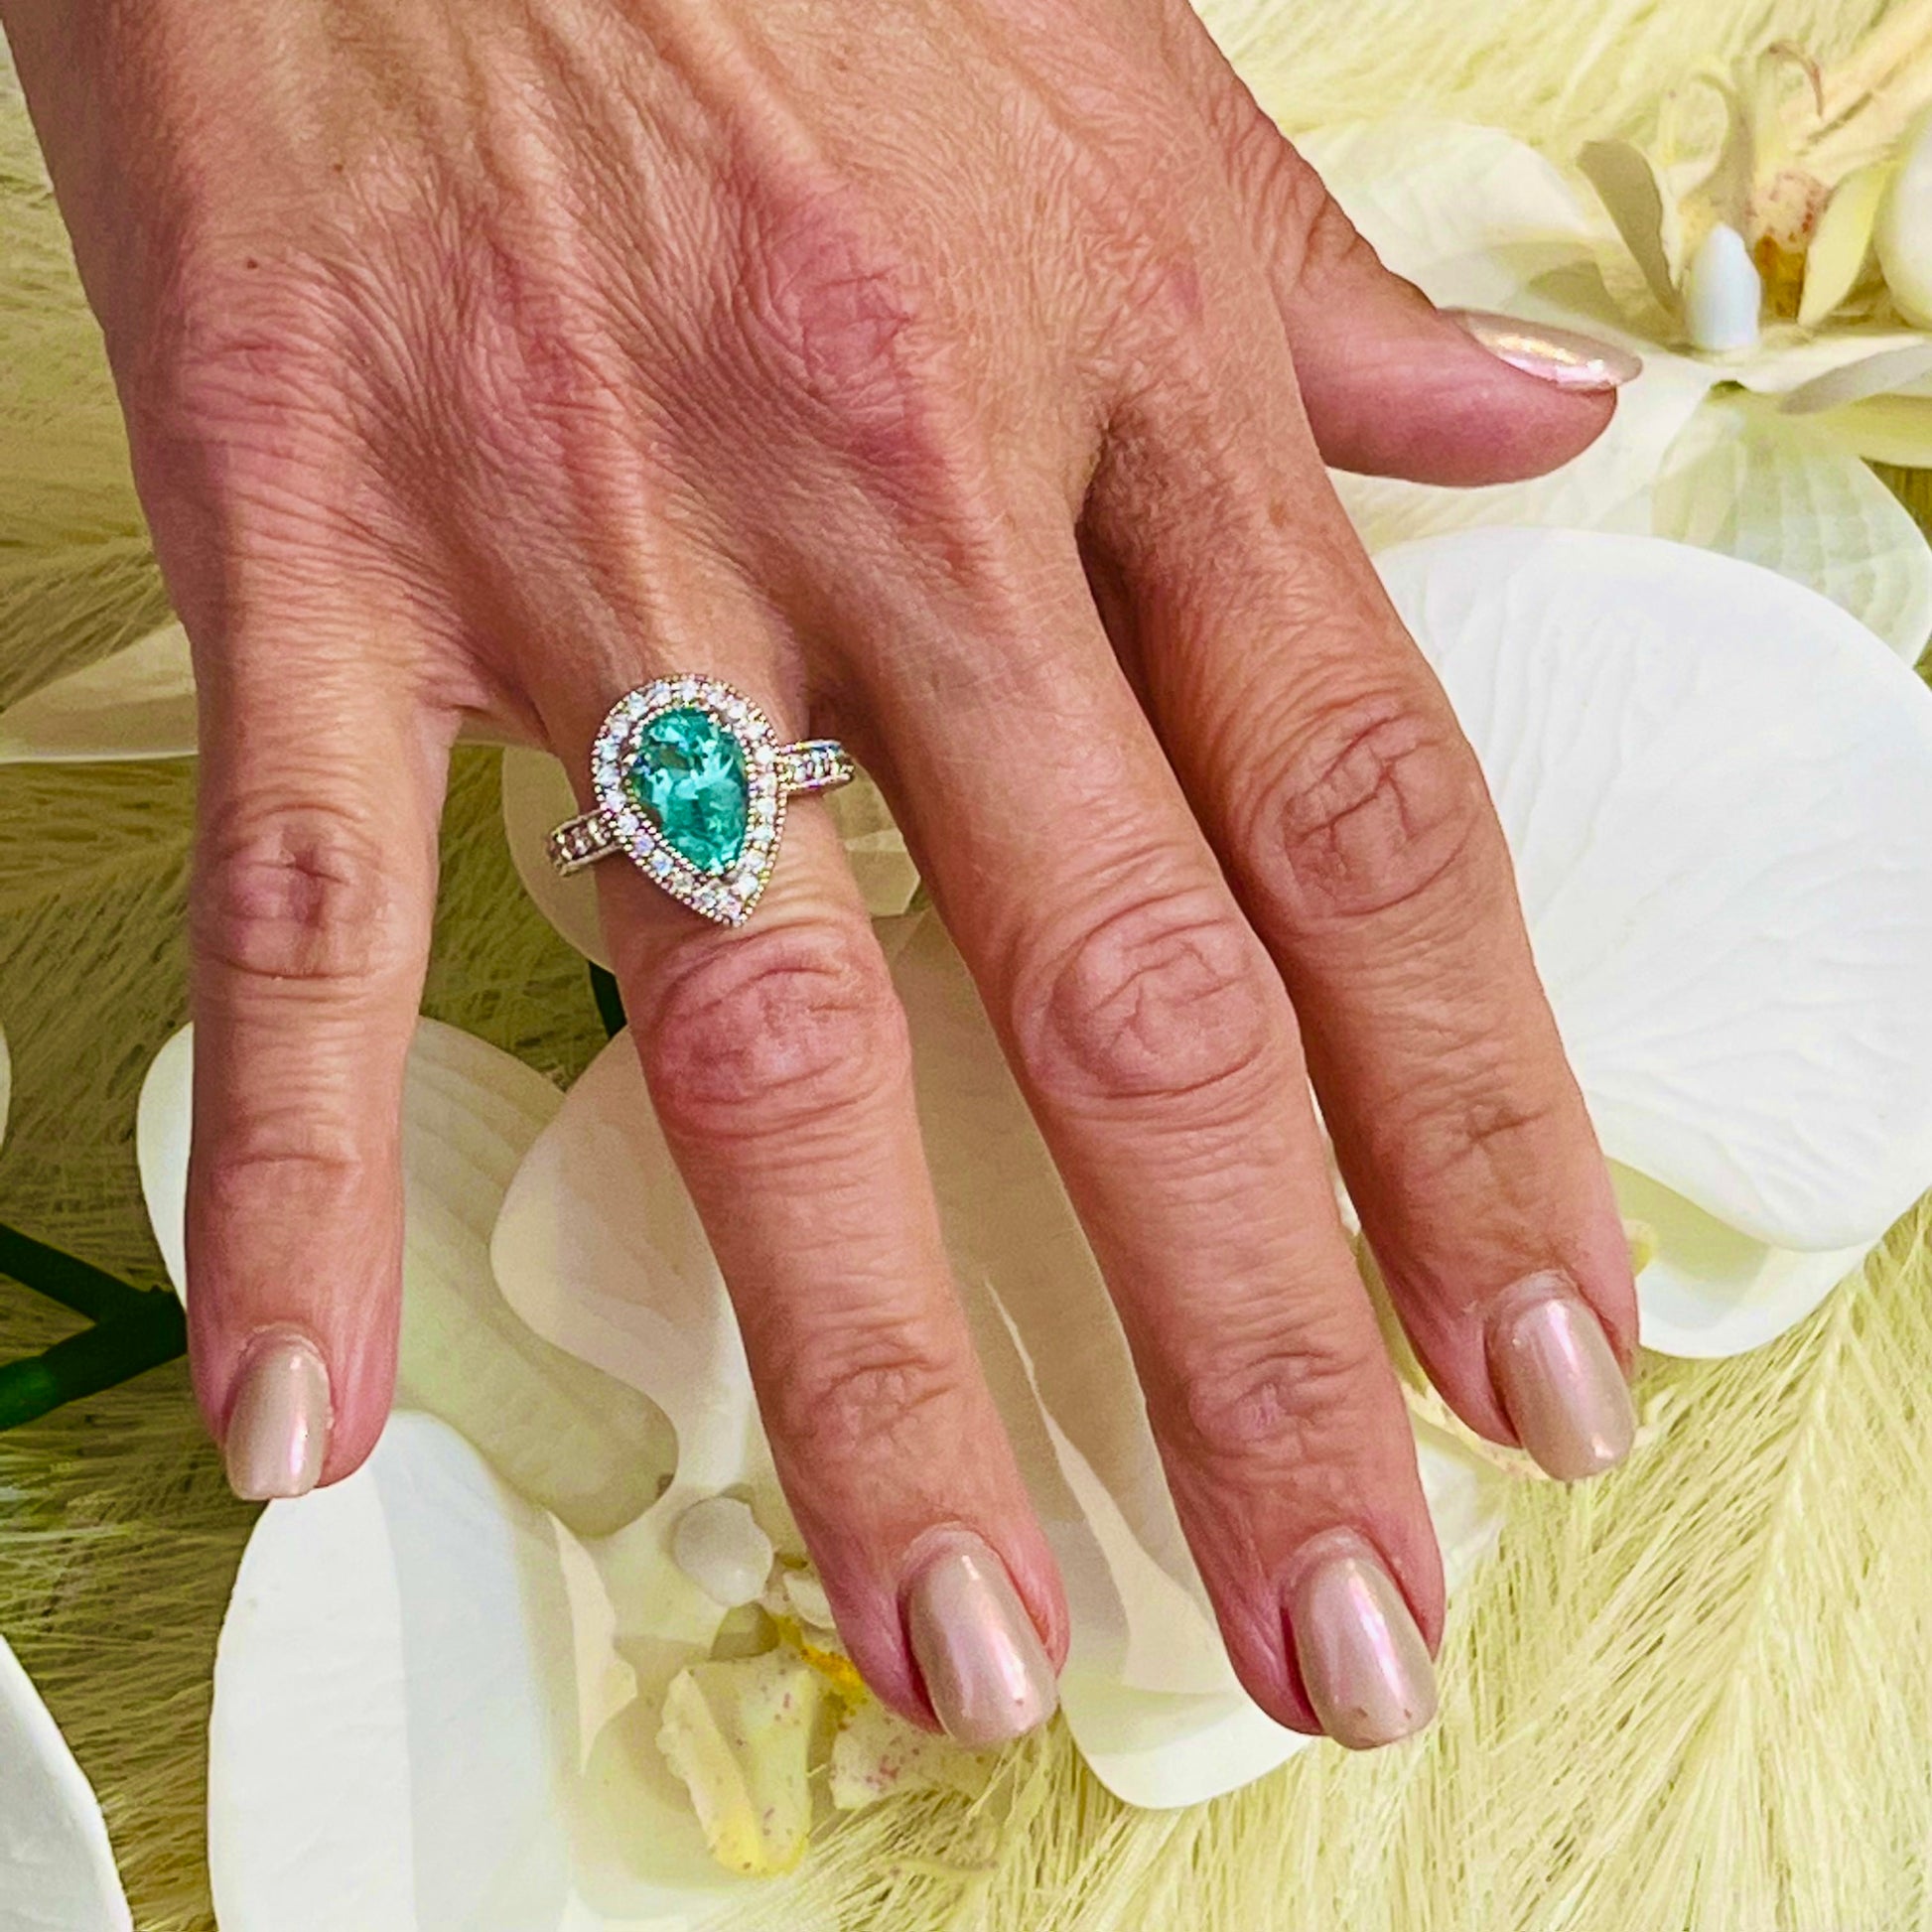 Natural Colombian Emerald Diamond Ring Size 6.5 14k W Gold 3.27 TCW Certified $7,950 216675 - Certified Fine Jewelry